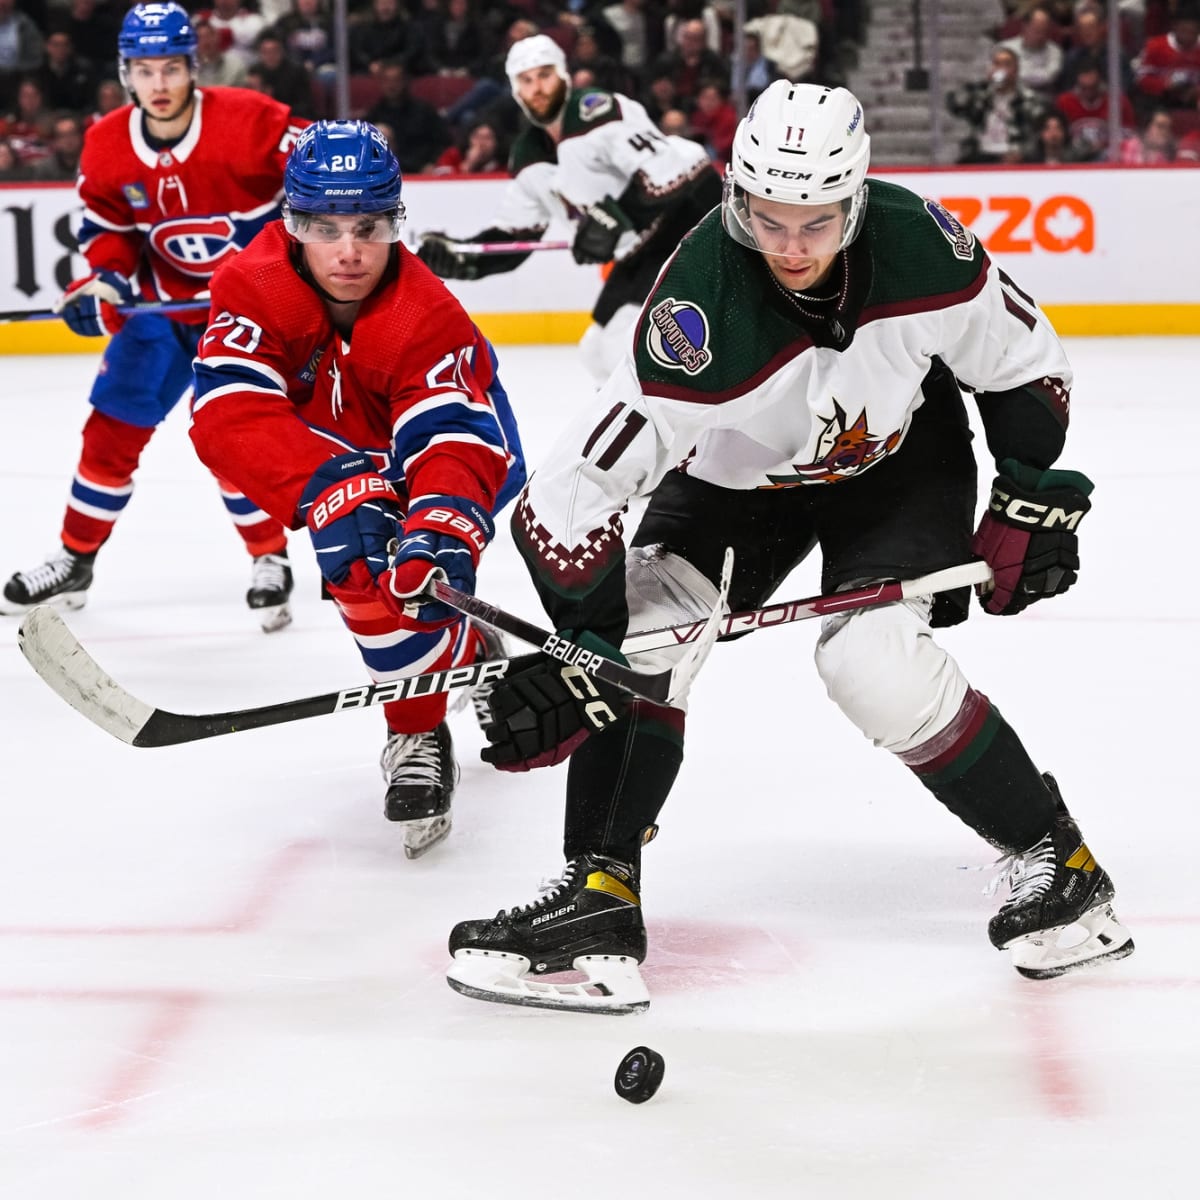 Coyotes' Prospect Dylan Guenther set for Memorial Cup Final - The